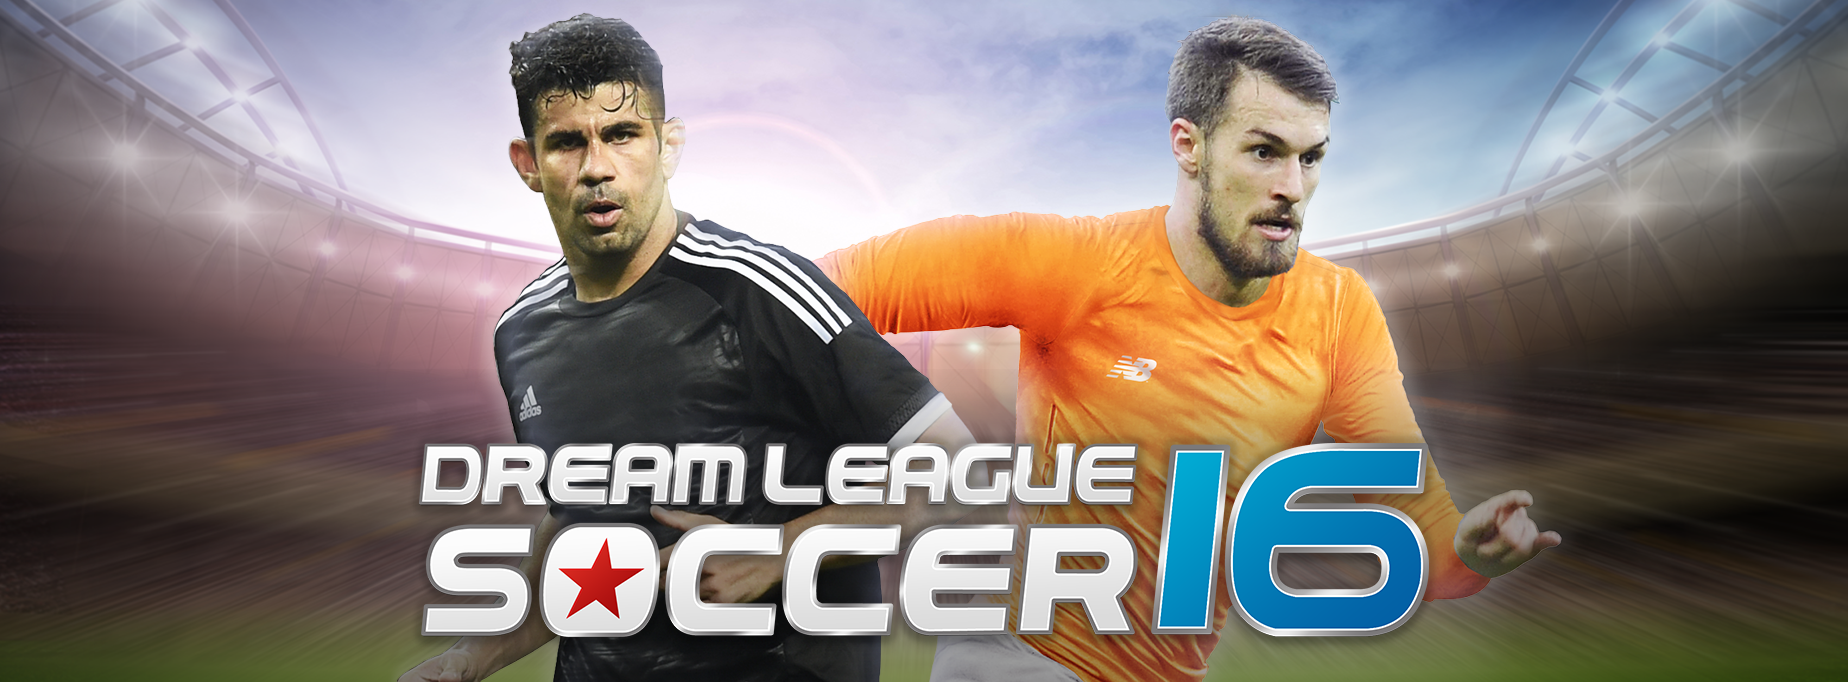 Dream League Soccer 2016 - Signing new players and Team Management 